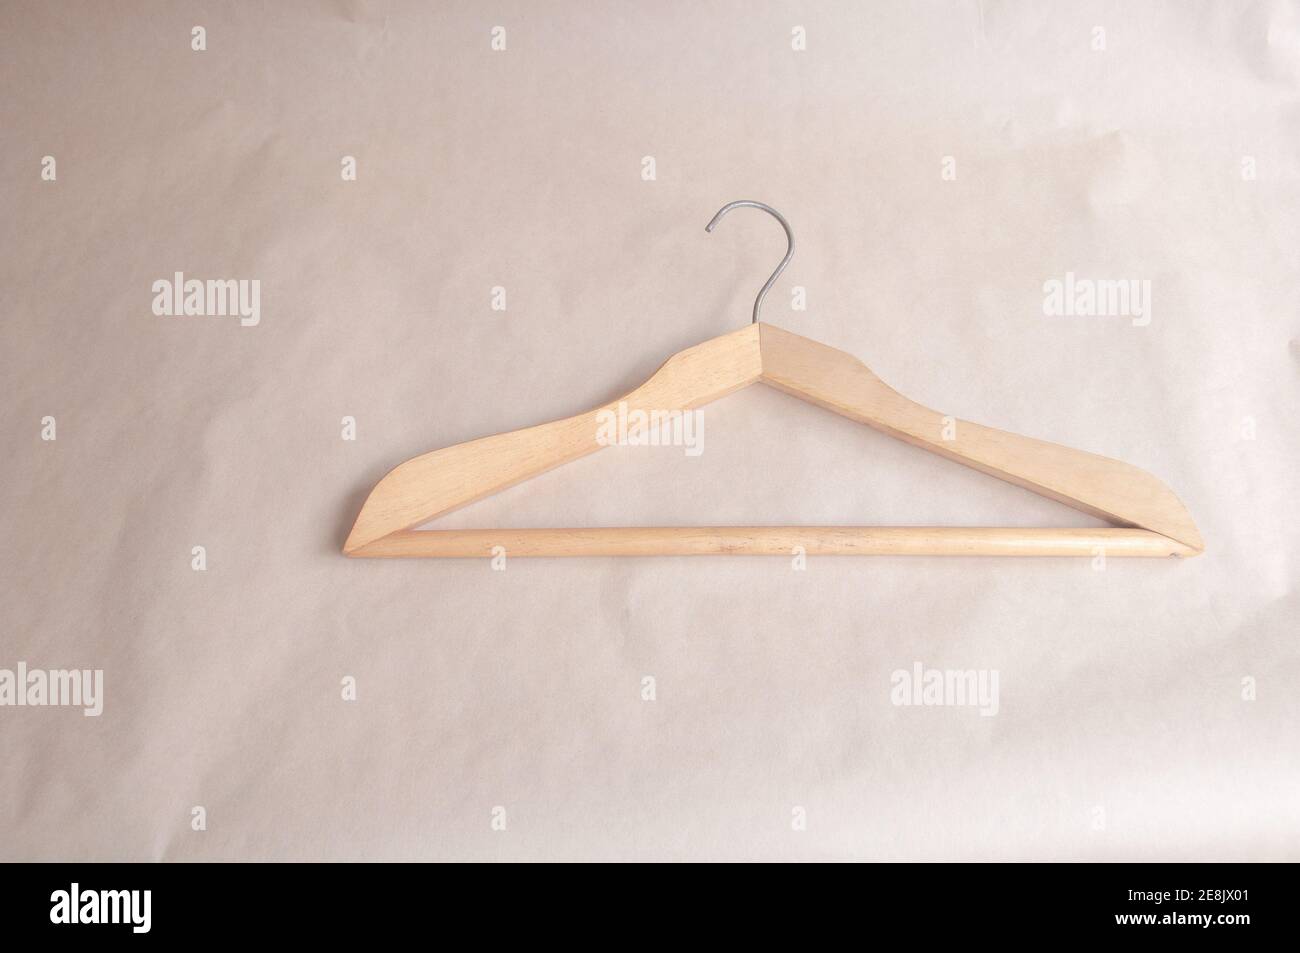 clothes hanger in a minimalist style on a beige background Stock Photo